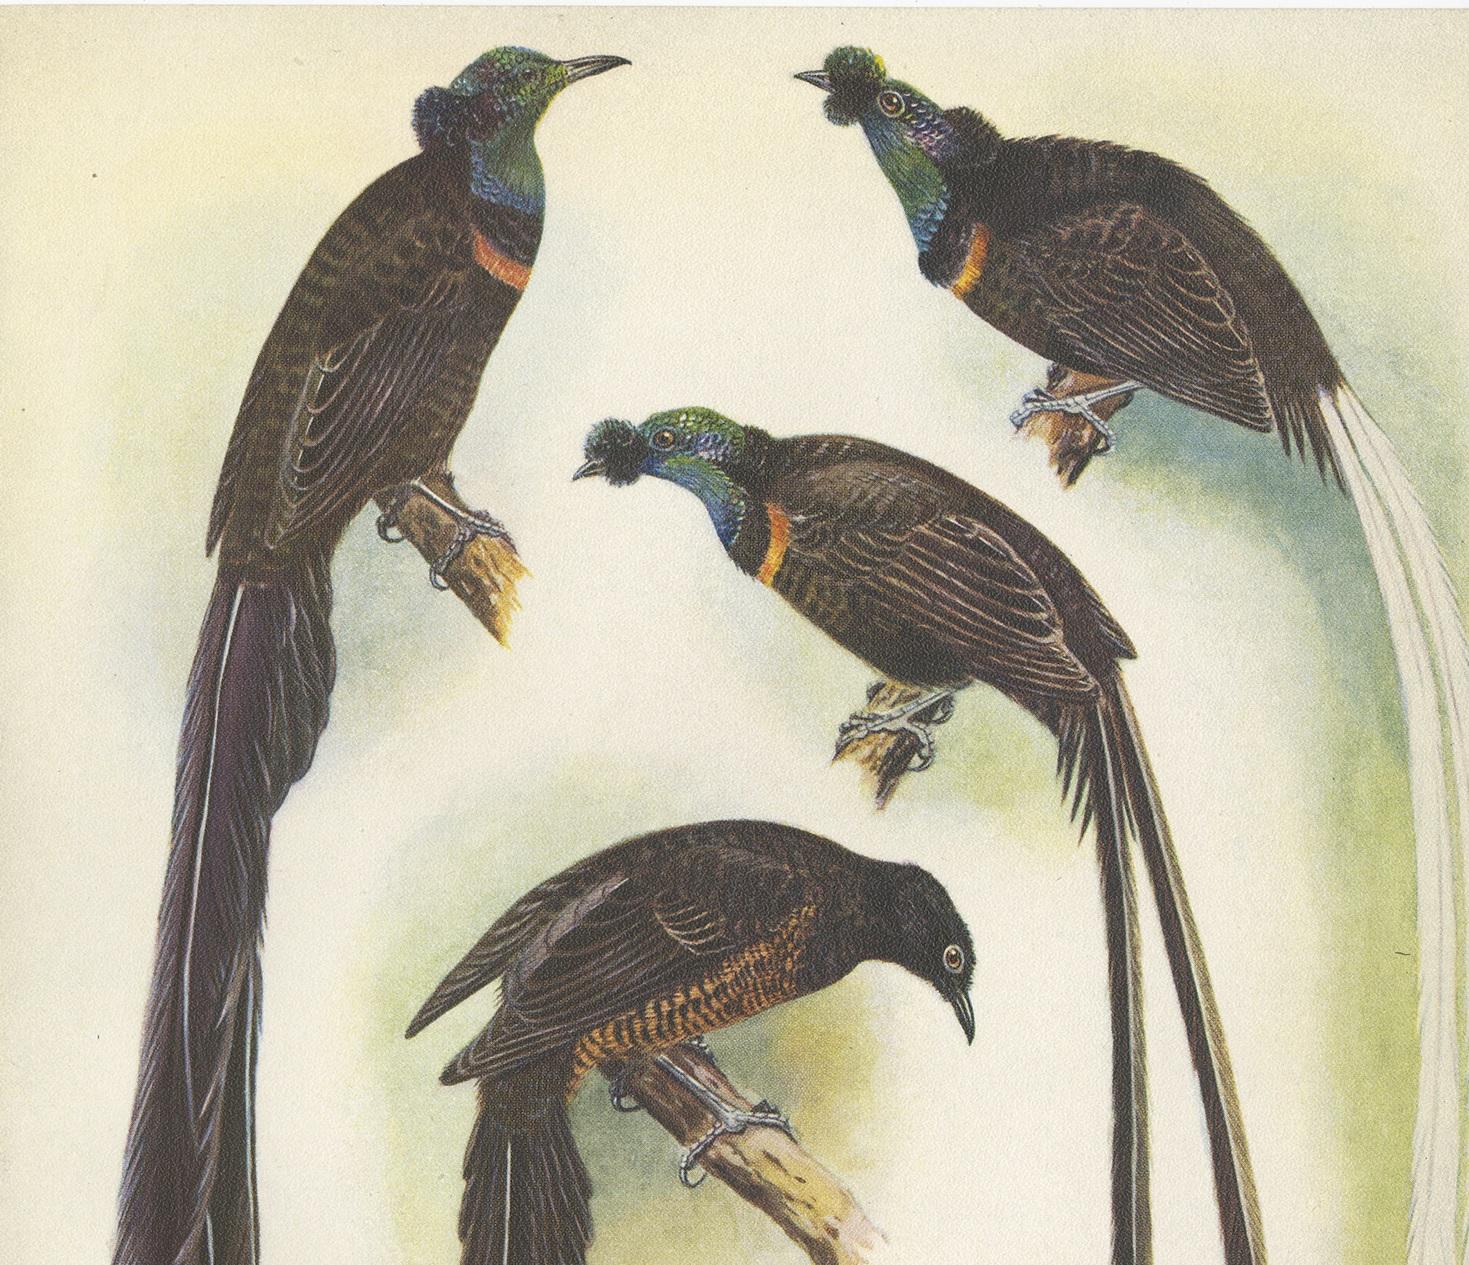 Decorative print illustrating the Princess Stephanie's Bird Paradise and the Ribbon-Tail Bird of Paradise. This authentic print originates from 'Birds of Paradise and Bower Birds' by Tom Iredale. With colored illustrations of Every Species by Lilian